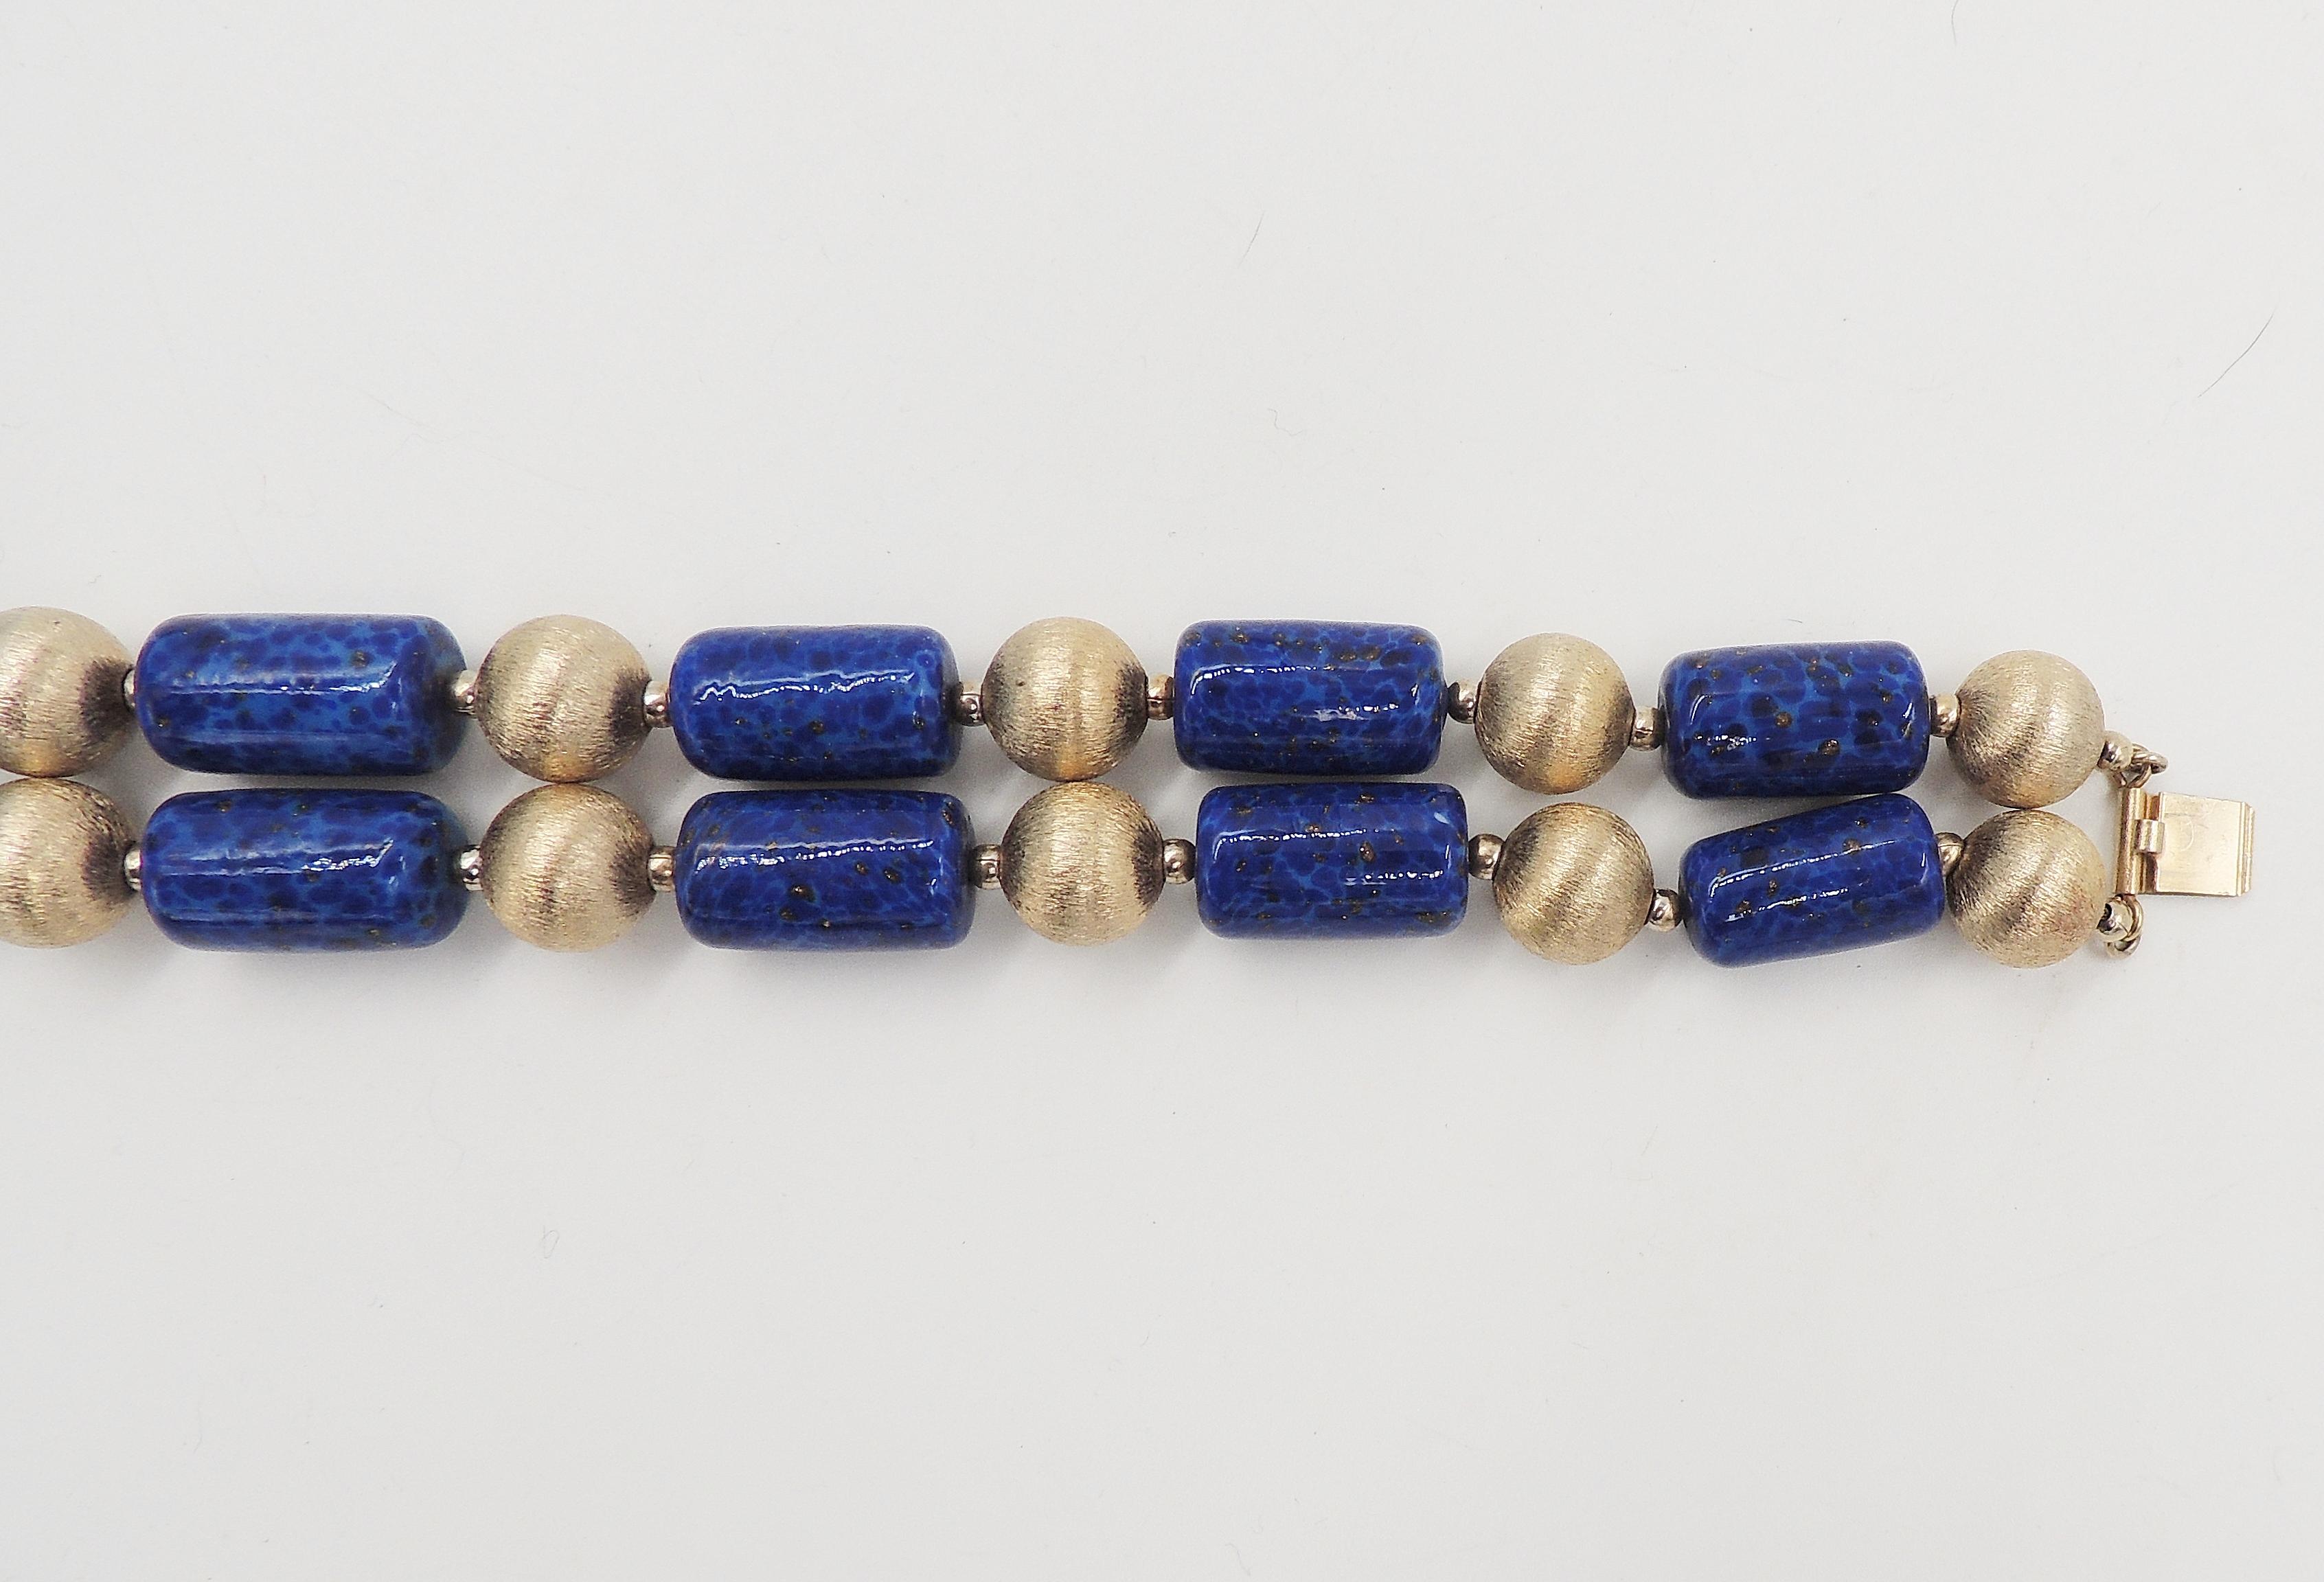 Early 1950s goldtone florentine finish beads and faux-lapis glass beads bracelet with decorative flower box clasp. Marked 